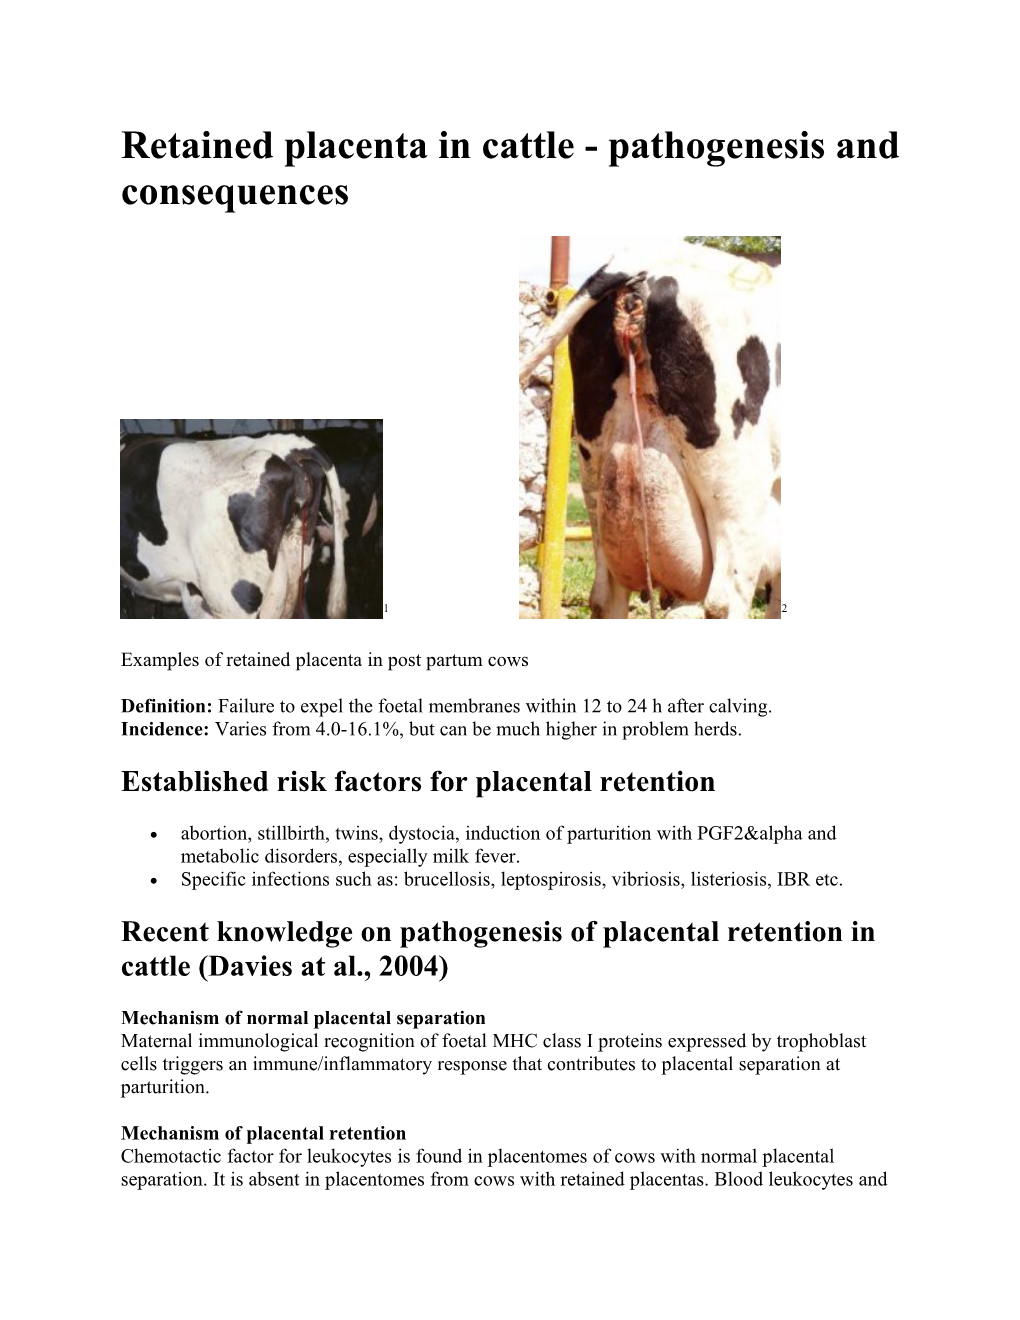 Retained Placenta in Cattle - Pathogenesis and Consequences